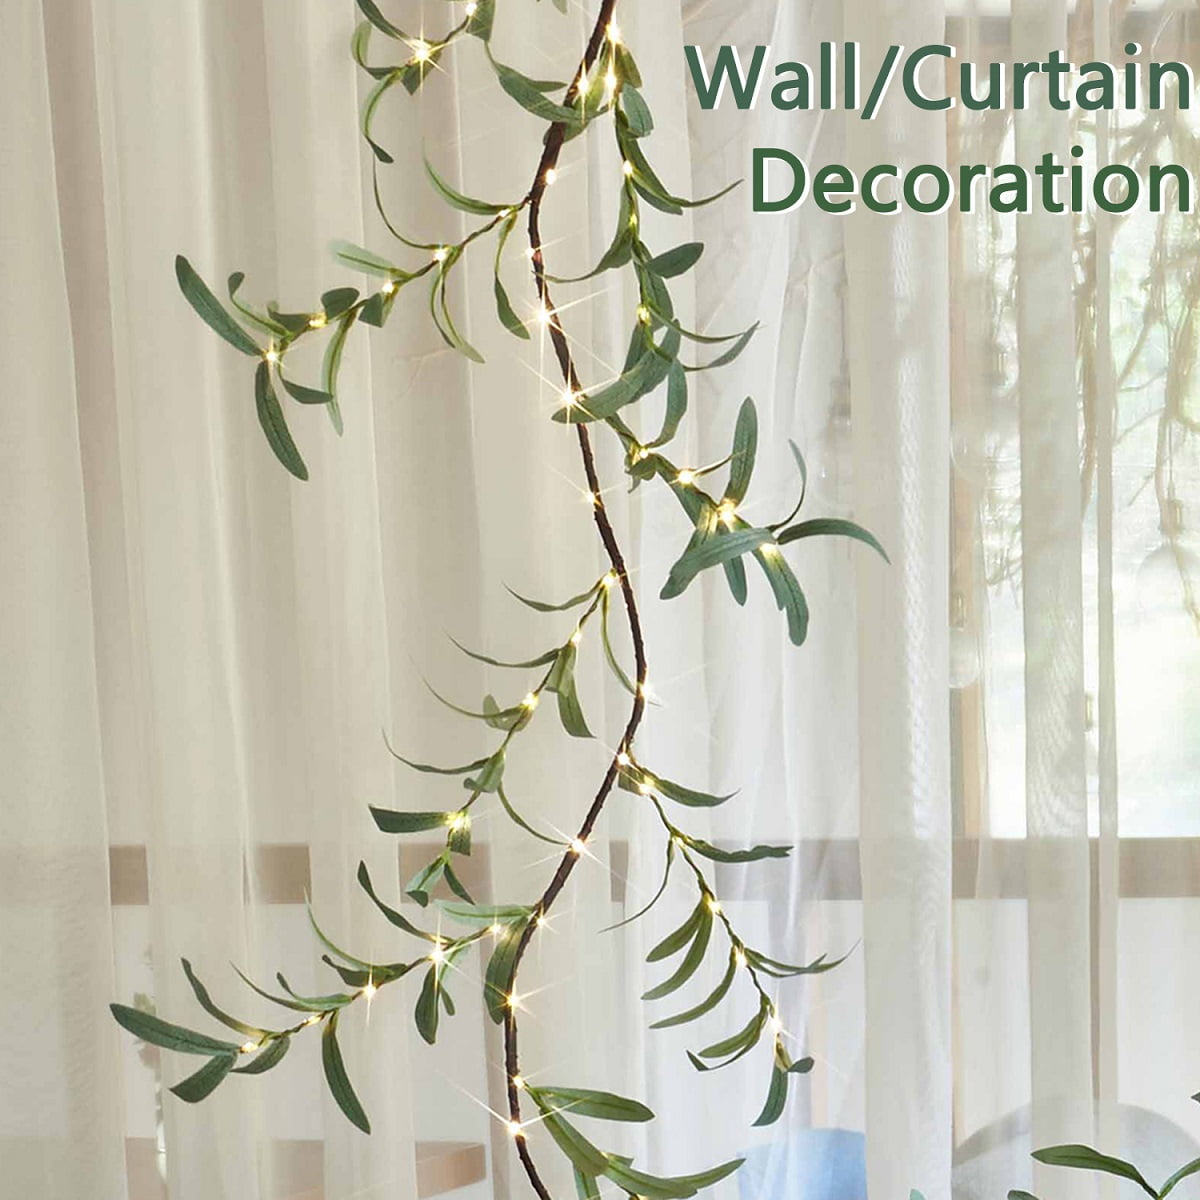 Fudios Pre-lit Twig Garland Lights Battery Operated with Timer